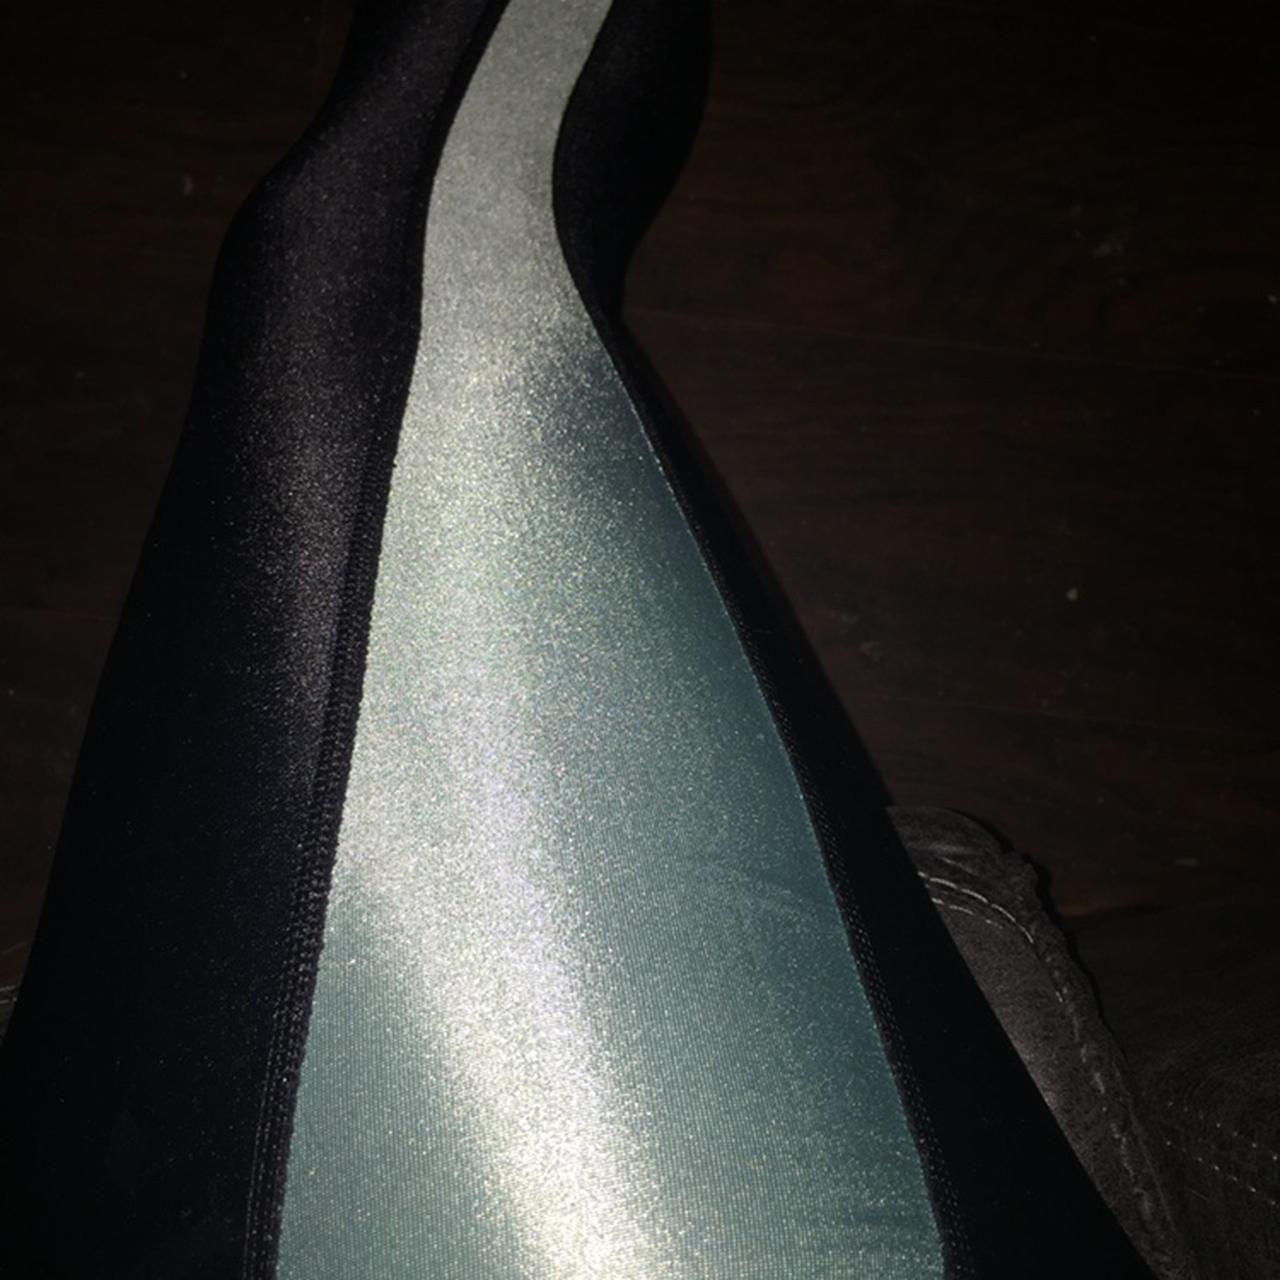 Beautiful shiny 80s vintage style leggings with a